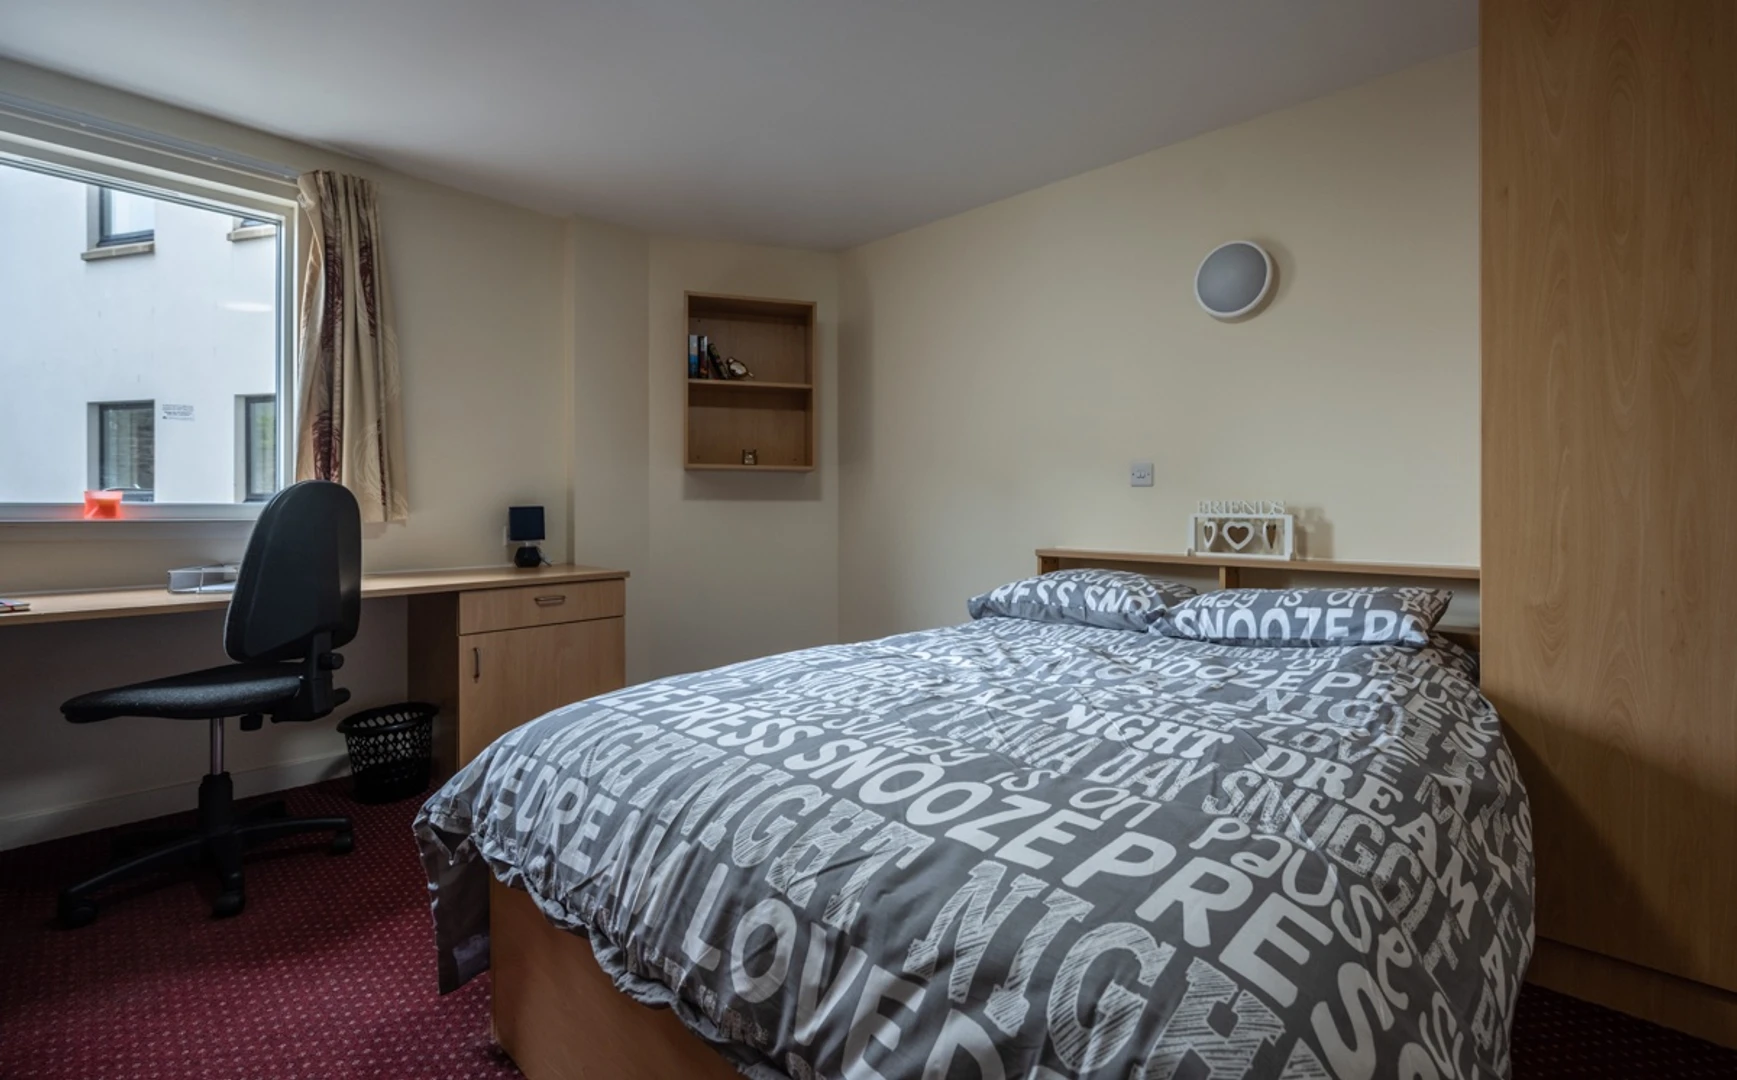 Room for rent in a shared flat in Dundee